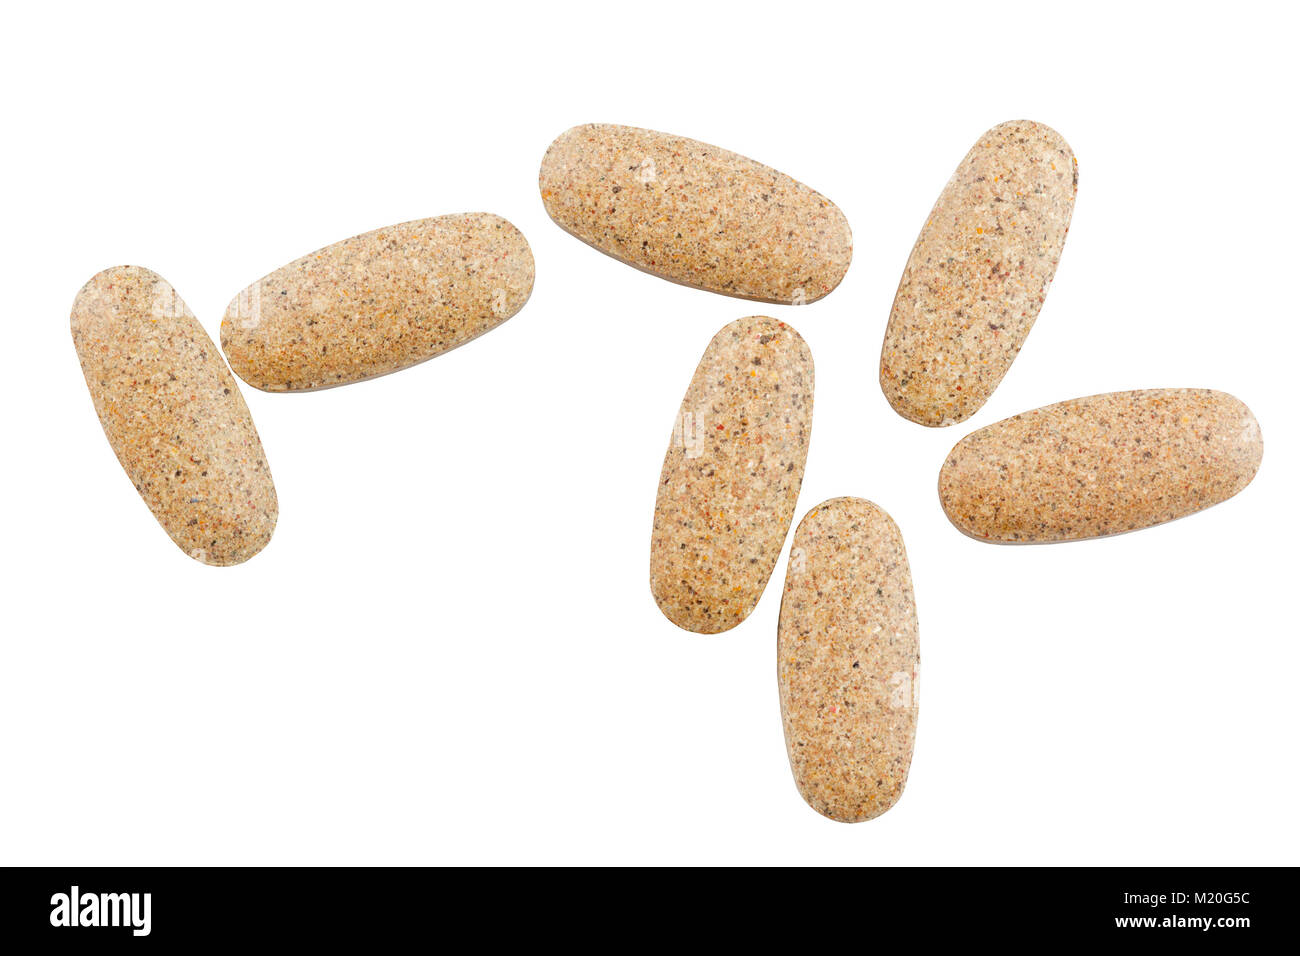 Multivitamin supplements cutout on white background Stock Photo